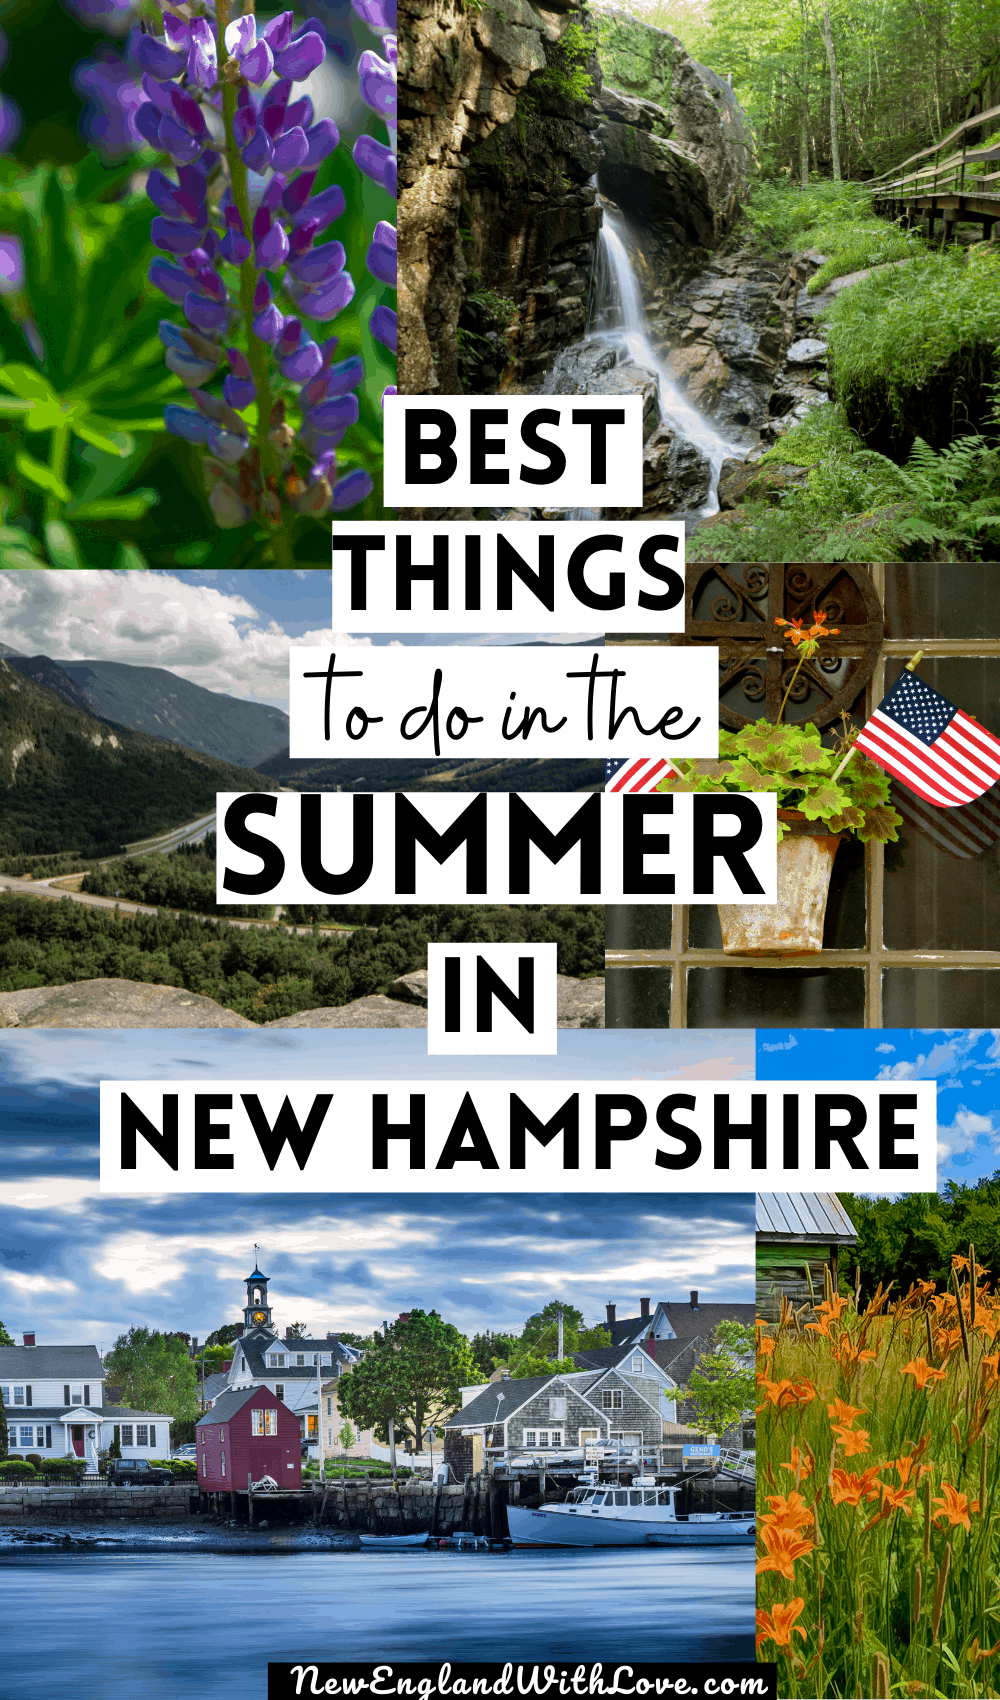 Pinterest graphic reading "BEST THINGS to do in the SUMMER IN NEW HAMPSHIRE"